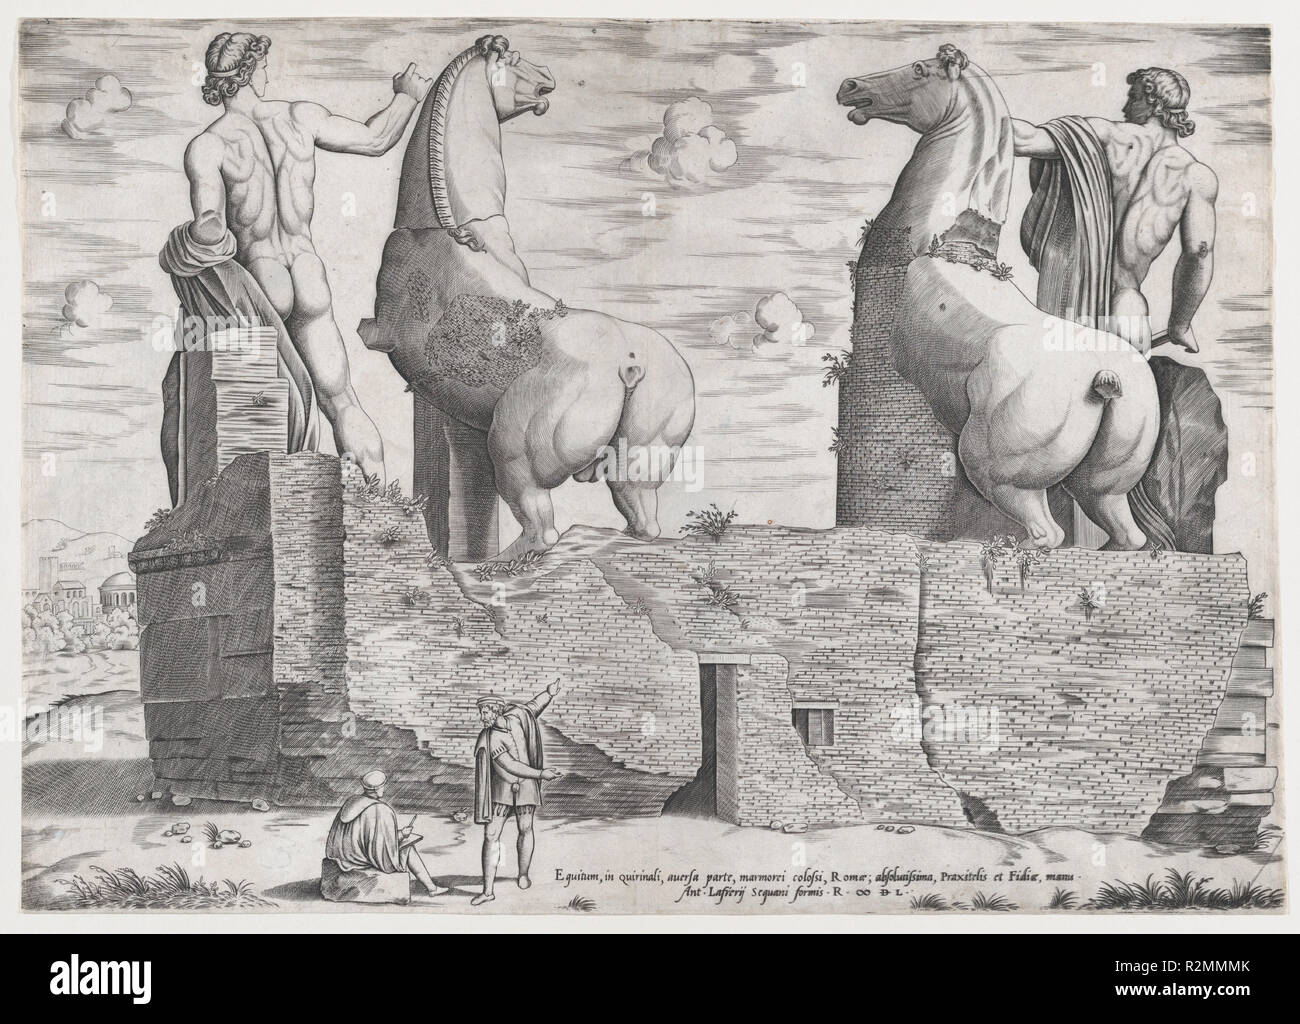 View of the Back of Statues of the Dioscuri at the Quirinal. Artist: Anonymous. Dimensions: sheet: 13 11/16 x 19 5/16 in. (34.7 x 49 cm). Publisher: Antonio Lafreri (French, Orgelet, Franche-Comte ca. 1512-1577 Rome). Series/Portfolio: Speculum Romanae Magnificentiae. Date: 1550.  Published as part of Antonio Lafreri's Speculum Romanae Magnificentiae (The Mirror of Roman Magnificence).  It is likely that individuals who purchased the prints from Lafreri made their own selections and had them bound. For a history of the publication of the Speculum prints, see Peter Parshall, 'Antonio Lafreri's  Stock Photo